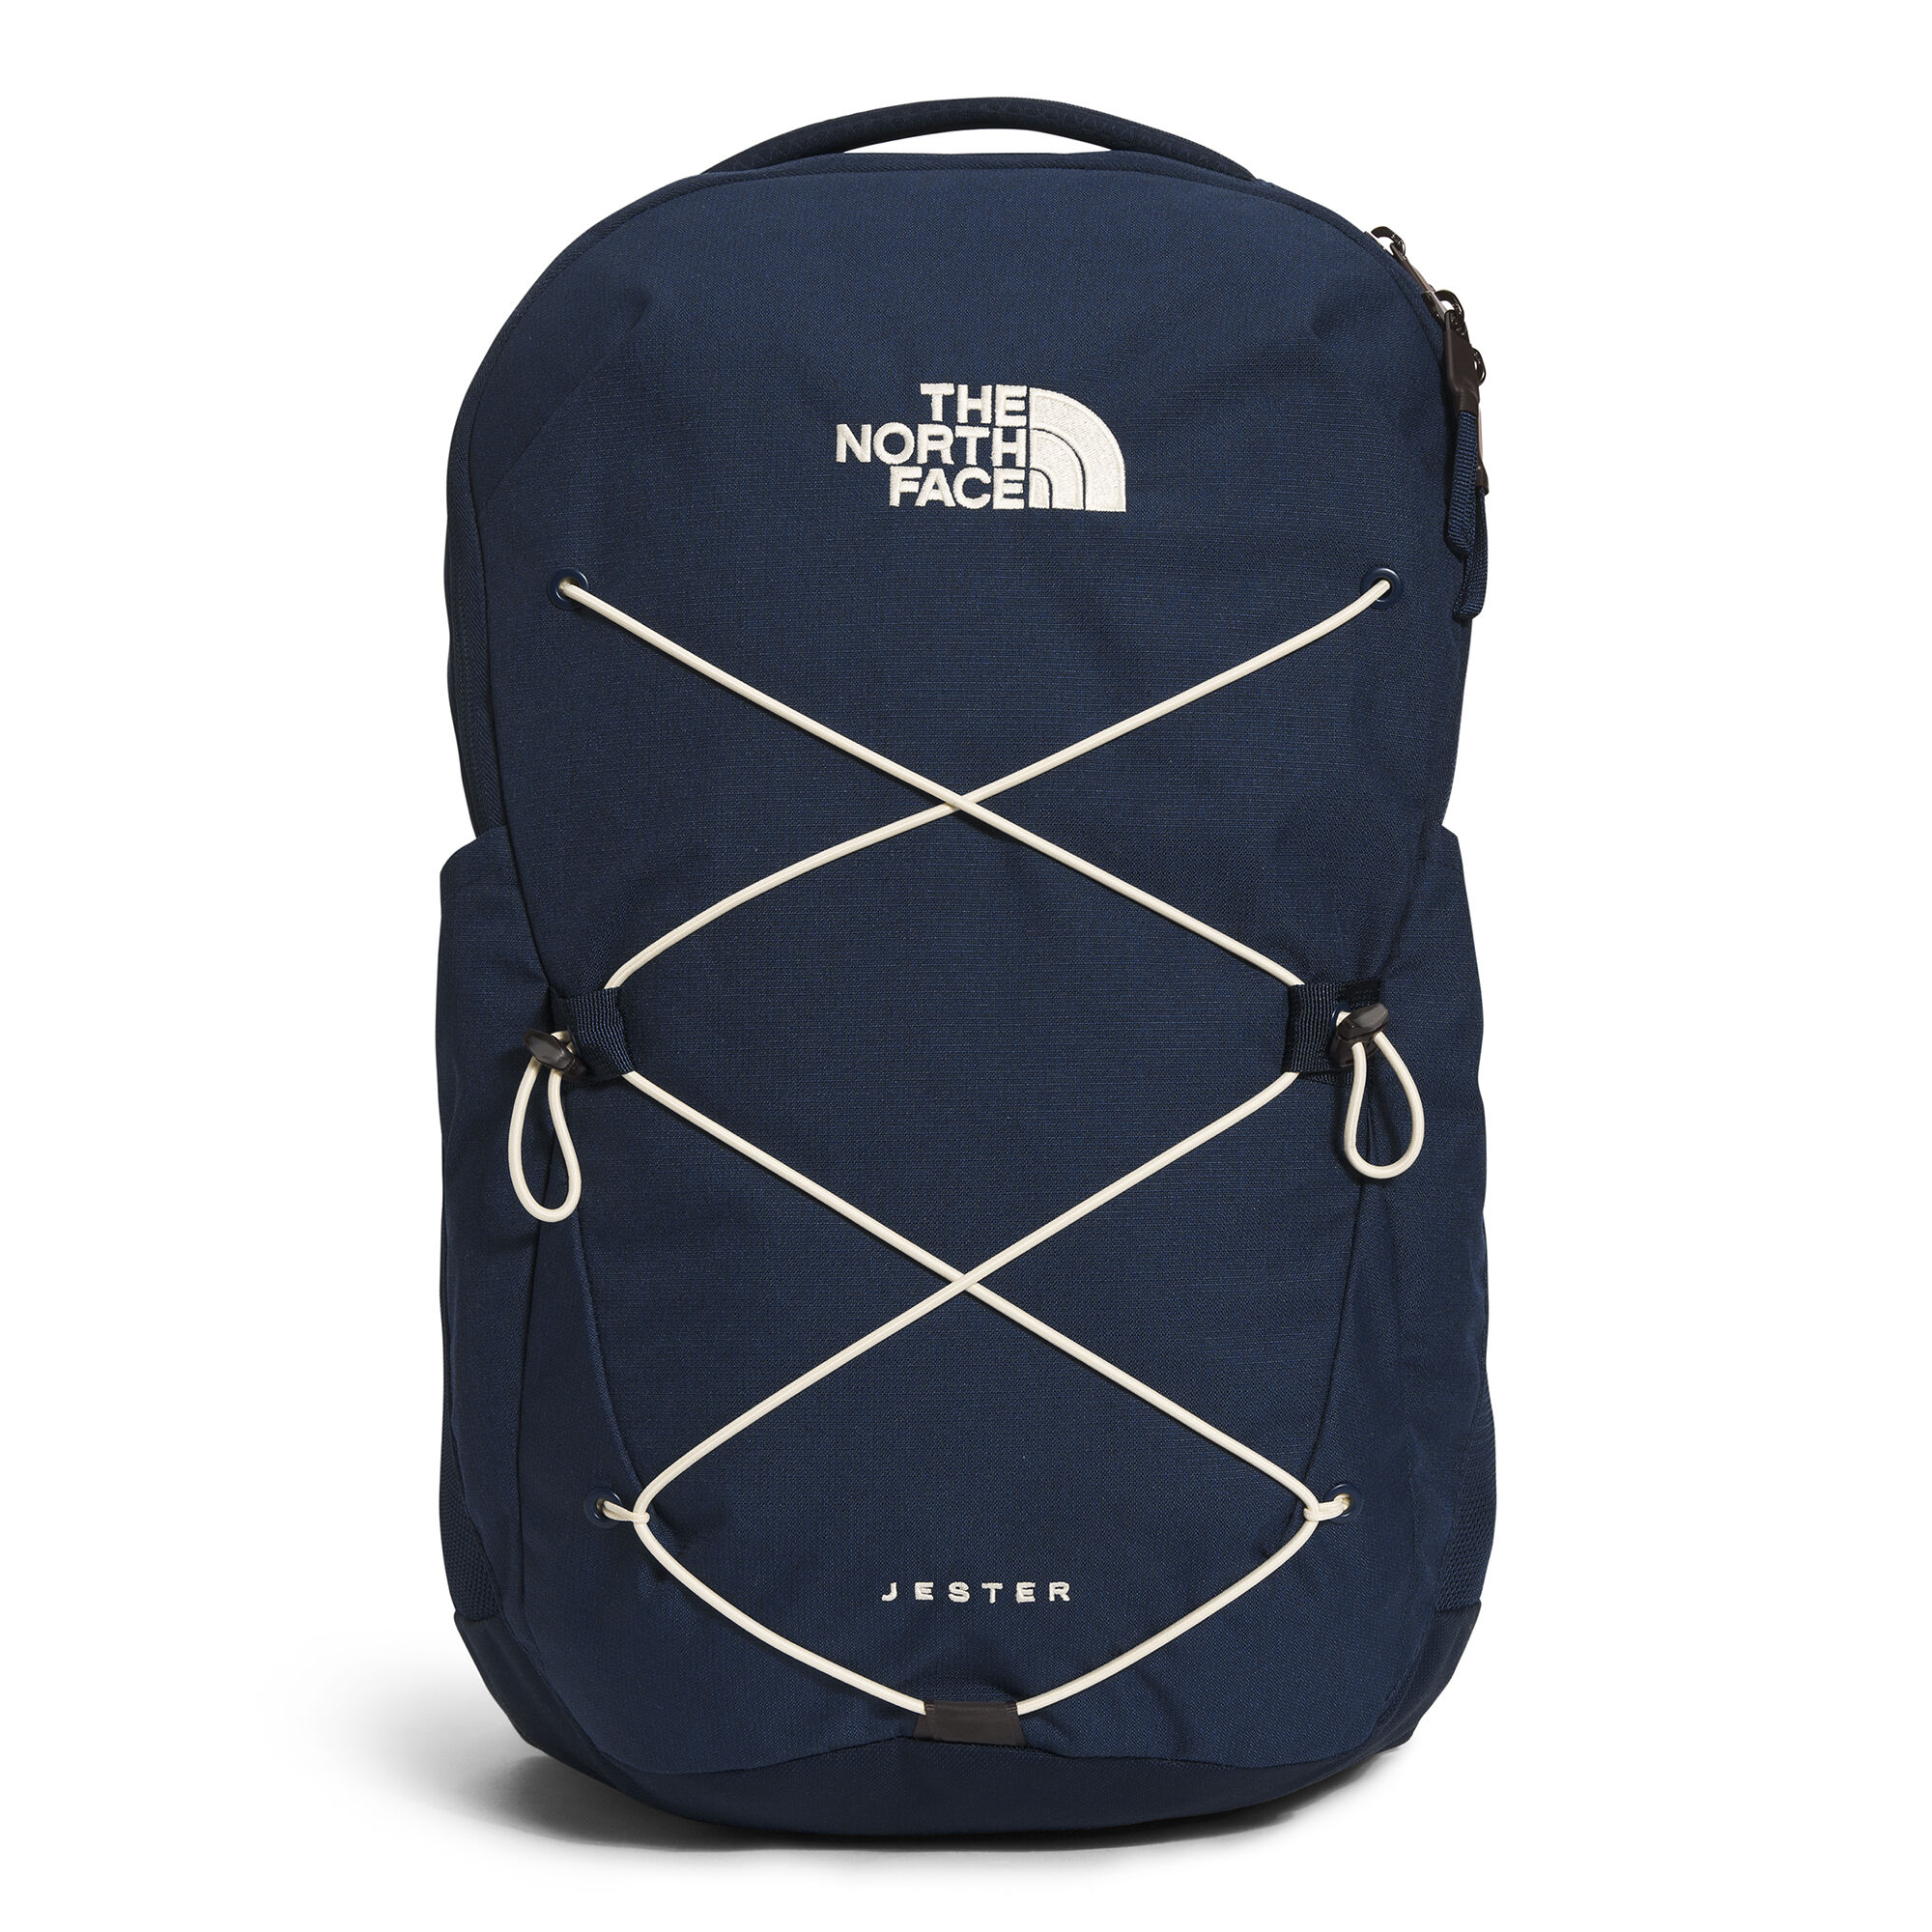 The North Face Men's Jester Backpack  - Pine Needle/Summit Navy/Power Or - Size: Large